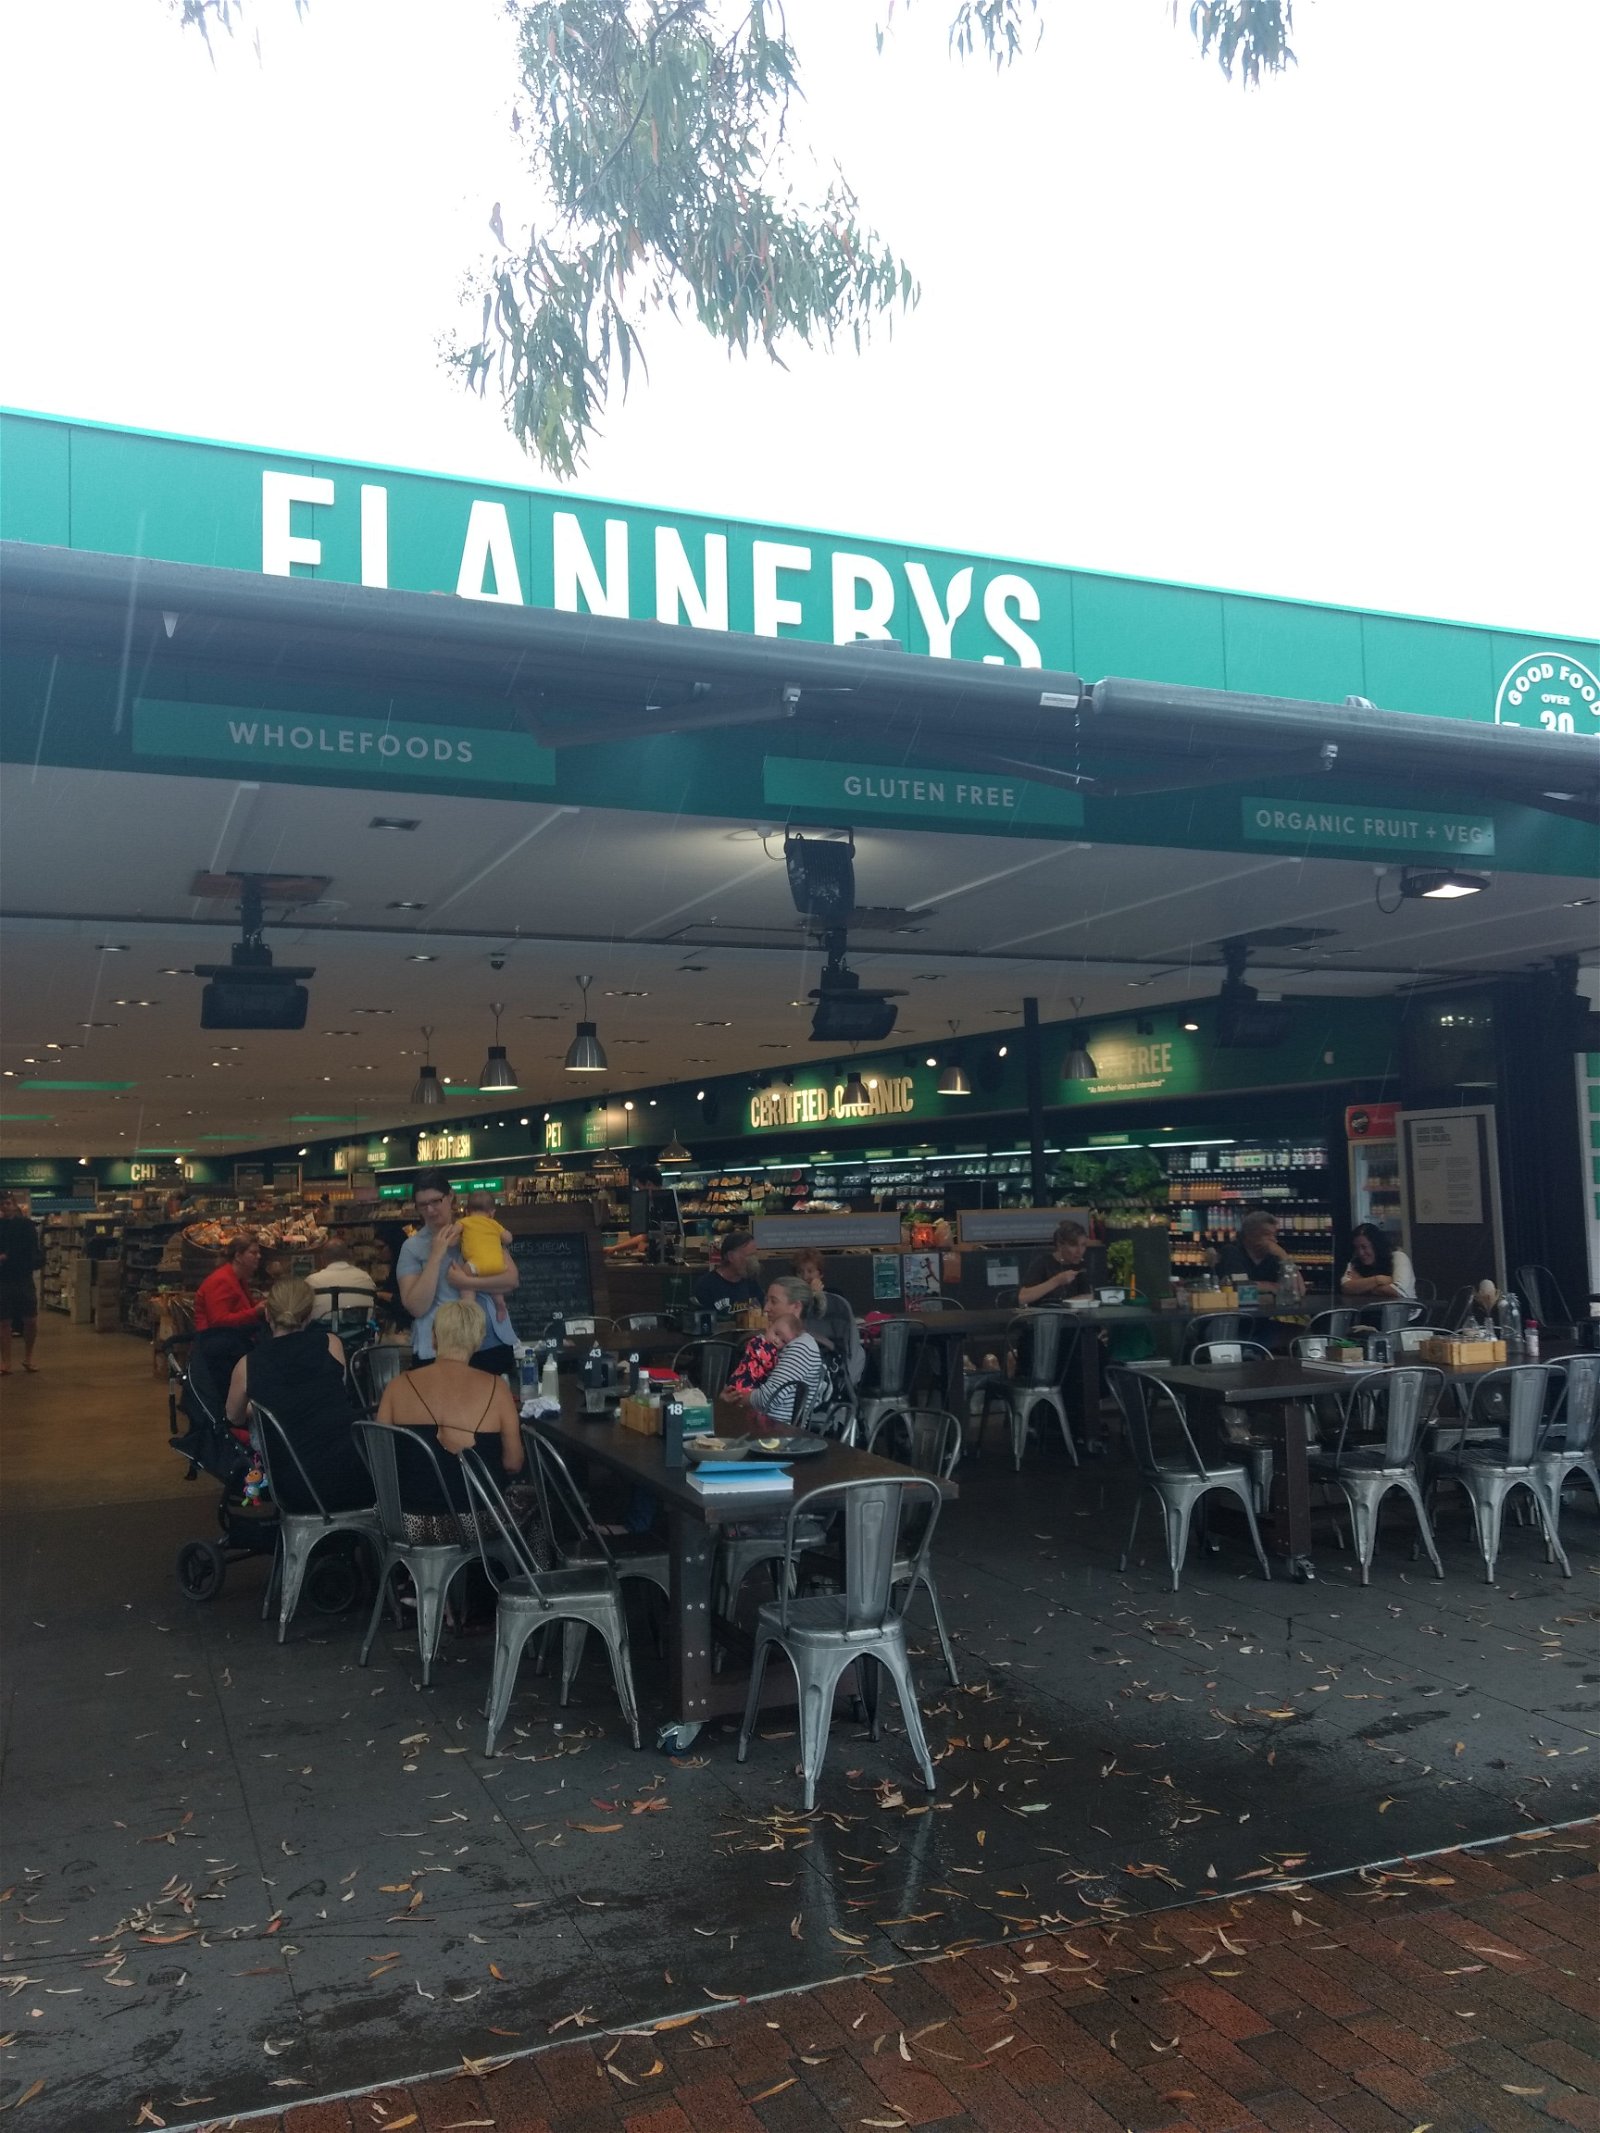 Flannery's - Pubs Sydney